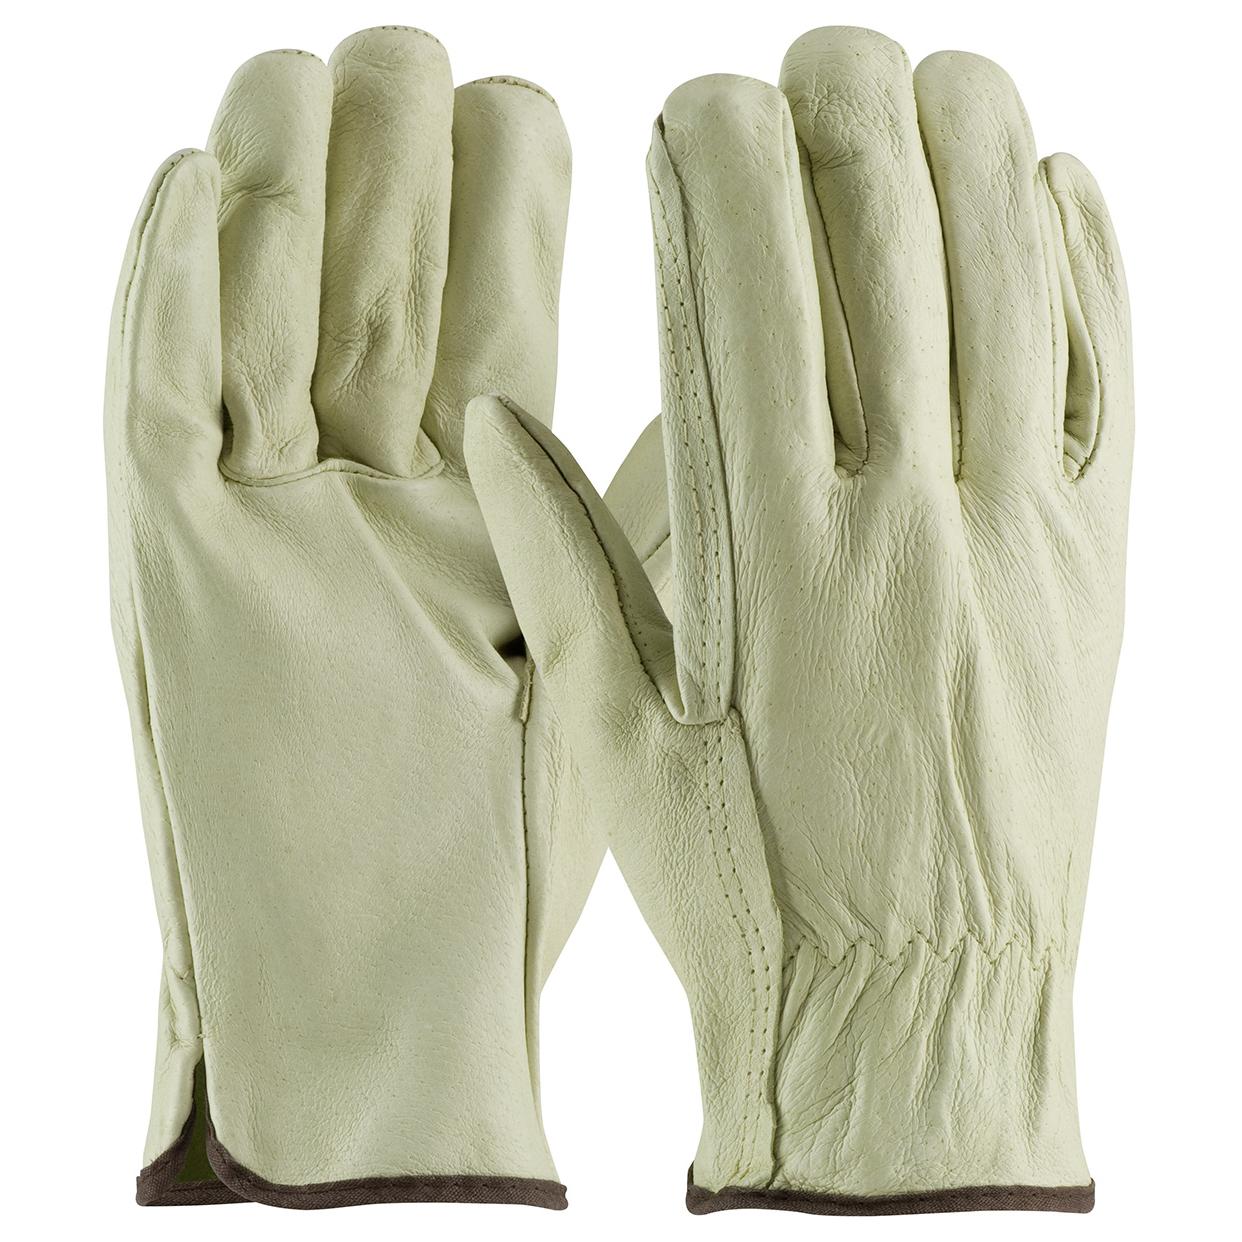 PIP® 70-300 Industrial Grade General Purpose Gloves, Drivers, Top Grain Pigskin Leather Palm, Top Grain Pigskin Leather, Natural, Slip-On Cuff, Uncoated Coating, Resists: Moisture, Unlined Lining, Straight Thumb